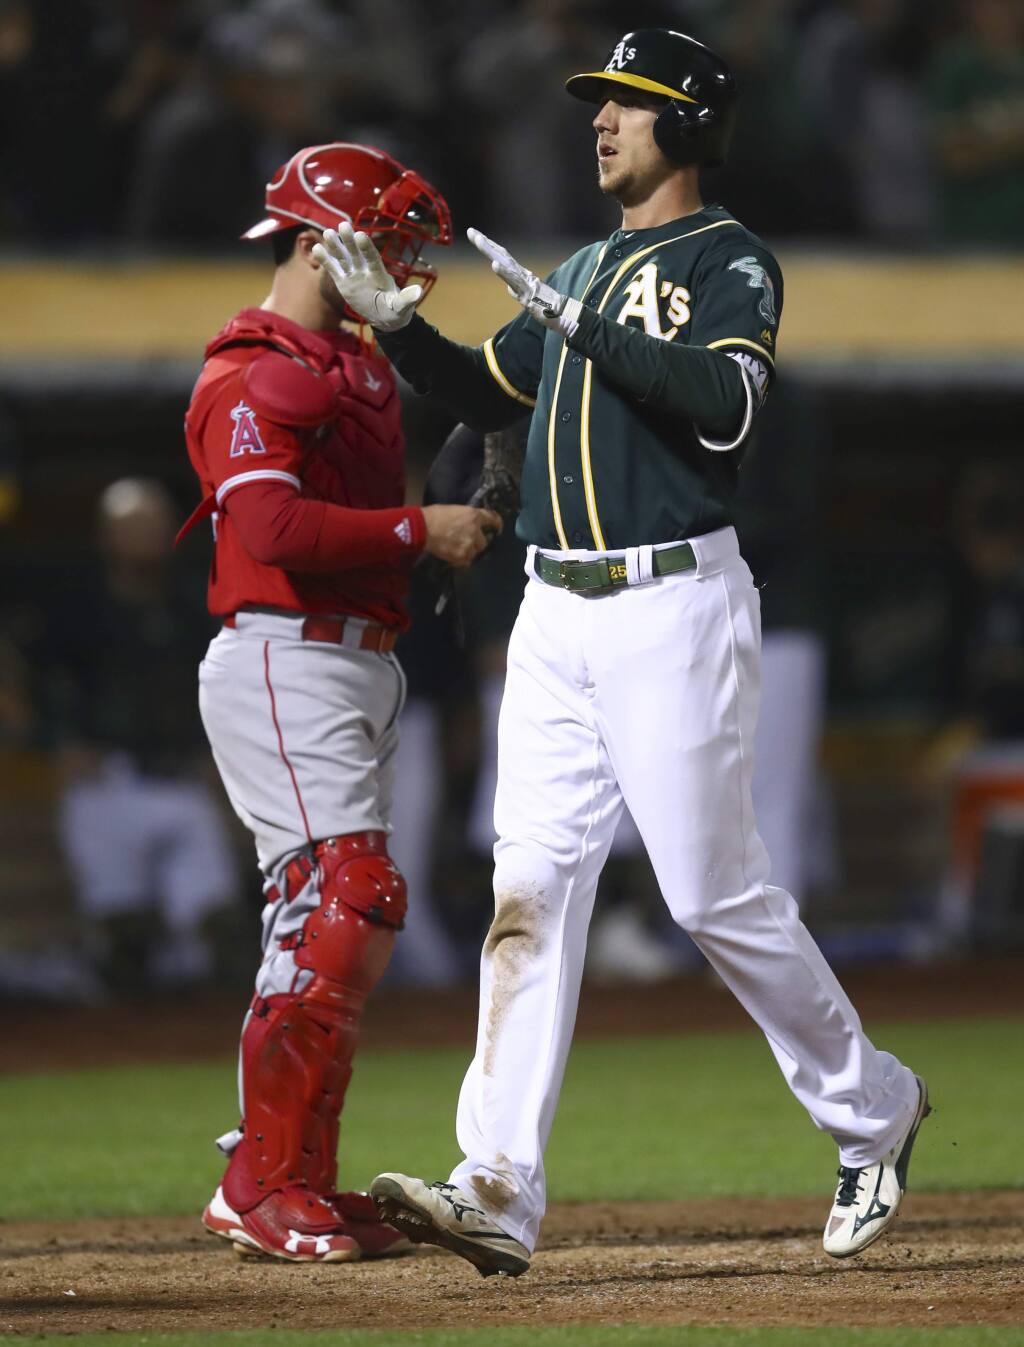 Stephen Piscotty's career day powers A's past Angels